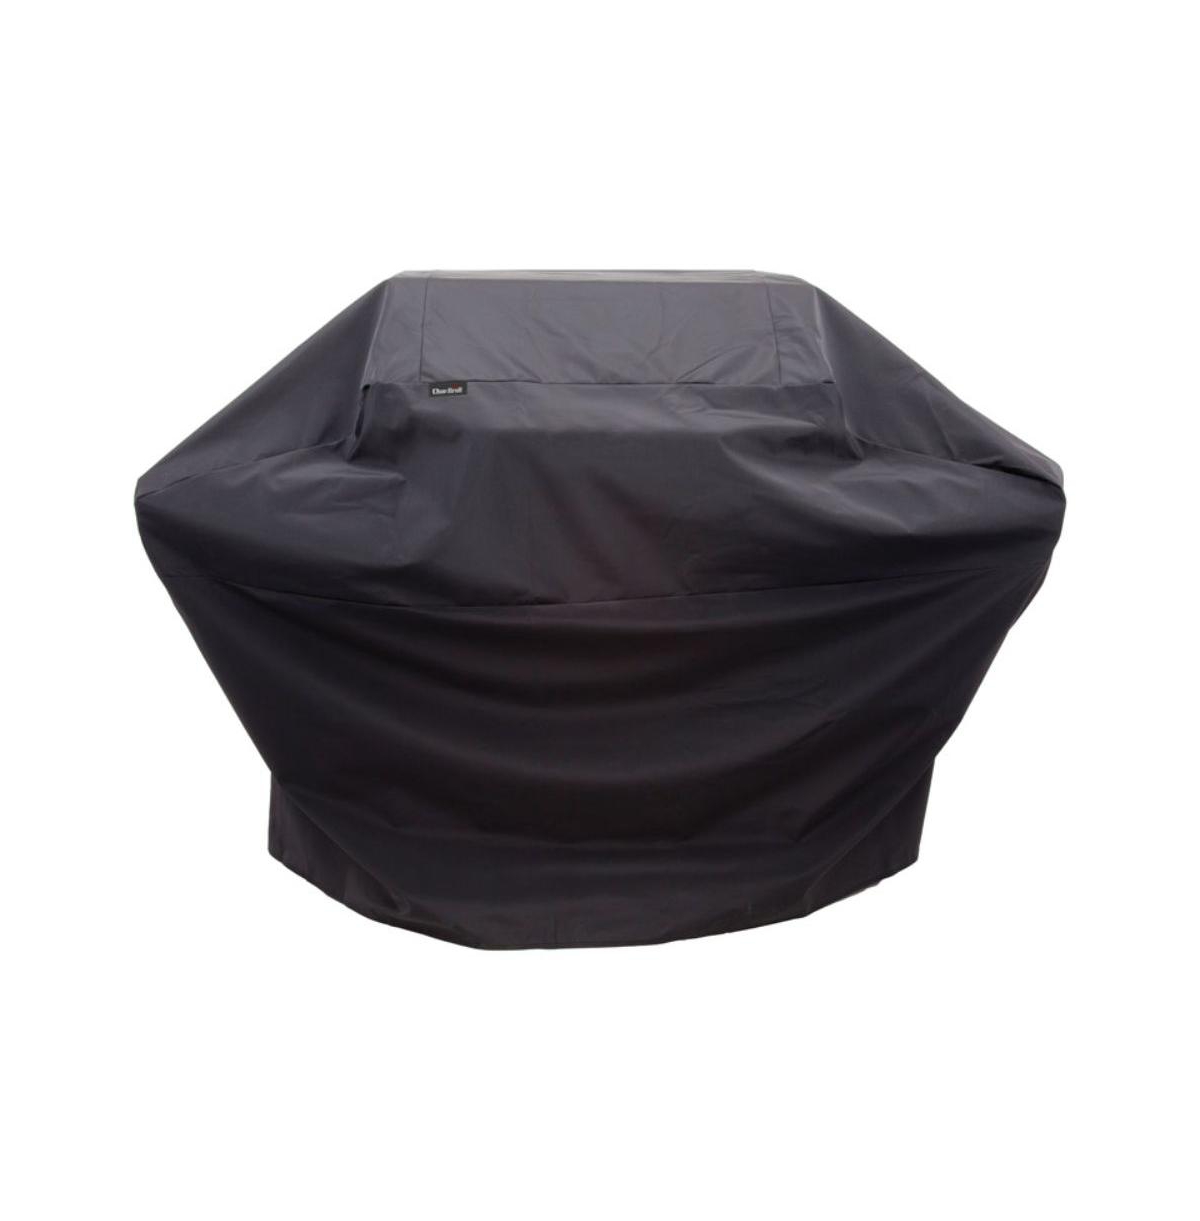 Black Grill Cover For Designed to fit 5 6 or 7 Burner Gas Grills X-Large 72 in. W x 42 - Black